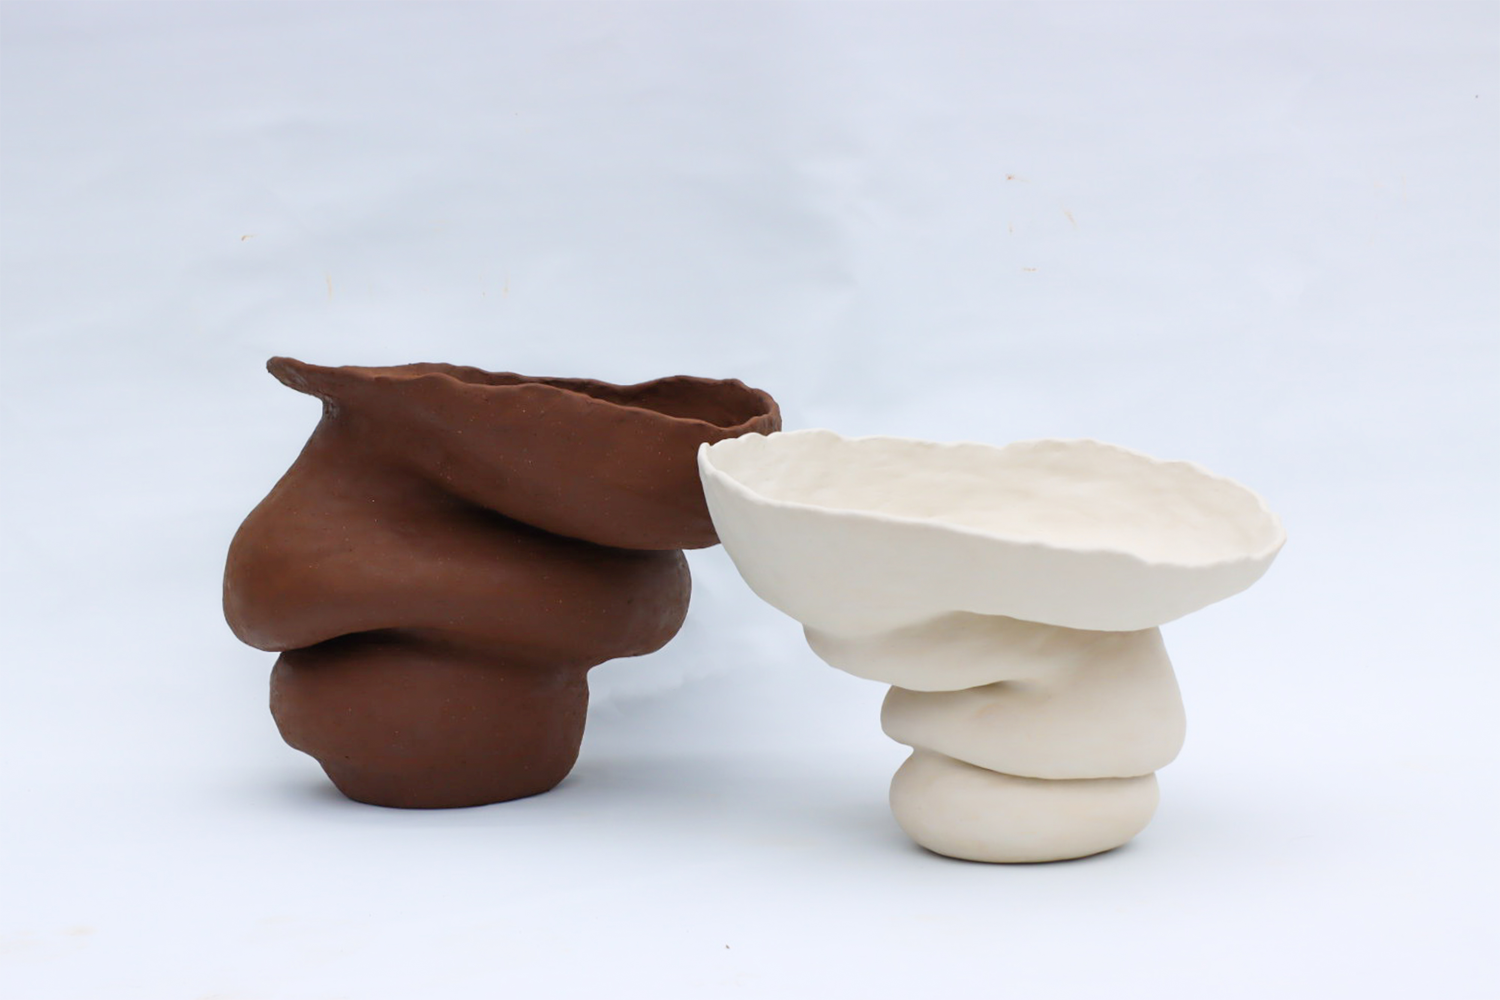 Two large voluptuous ceramic forms in front of a white backdrop, coloured from left to right, dark brown and white.